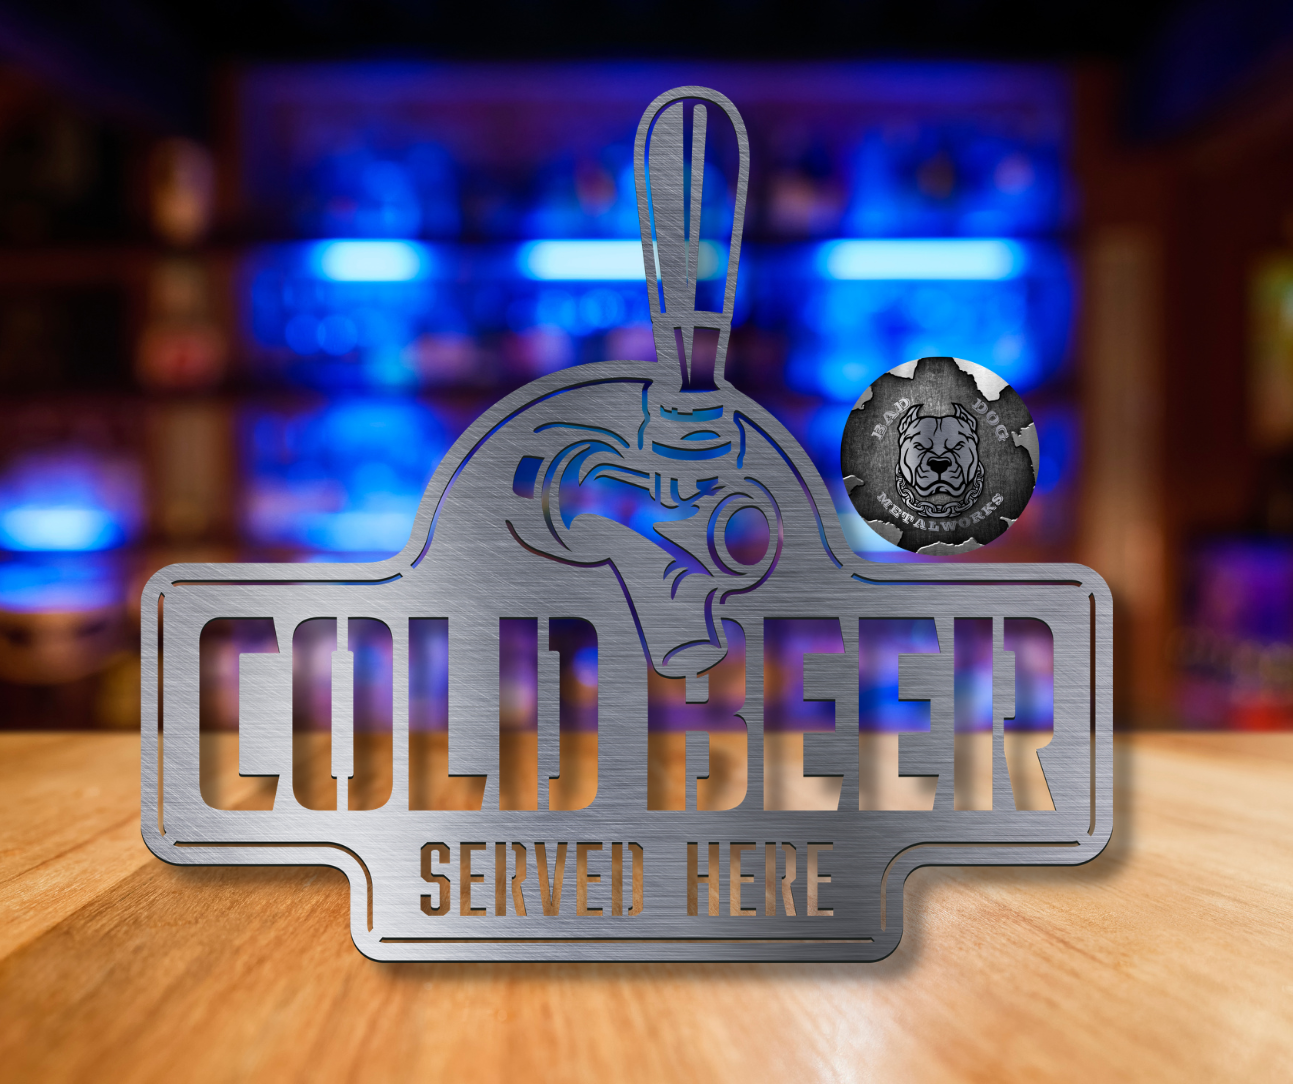 Cold Beer Served Here